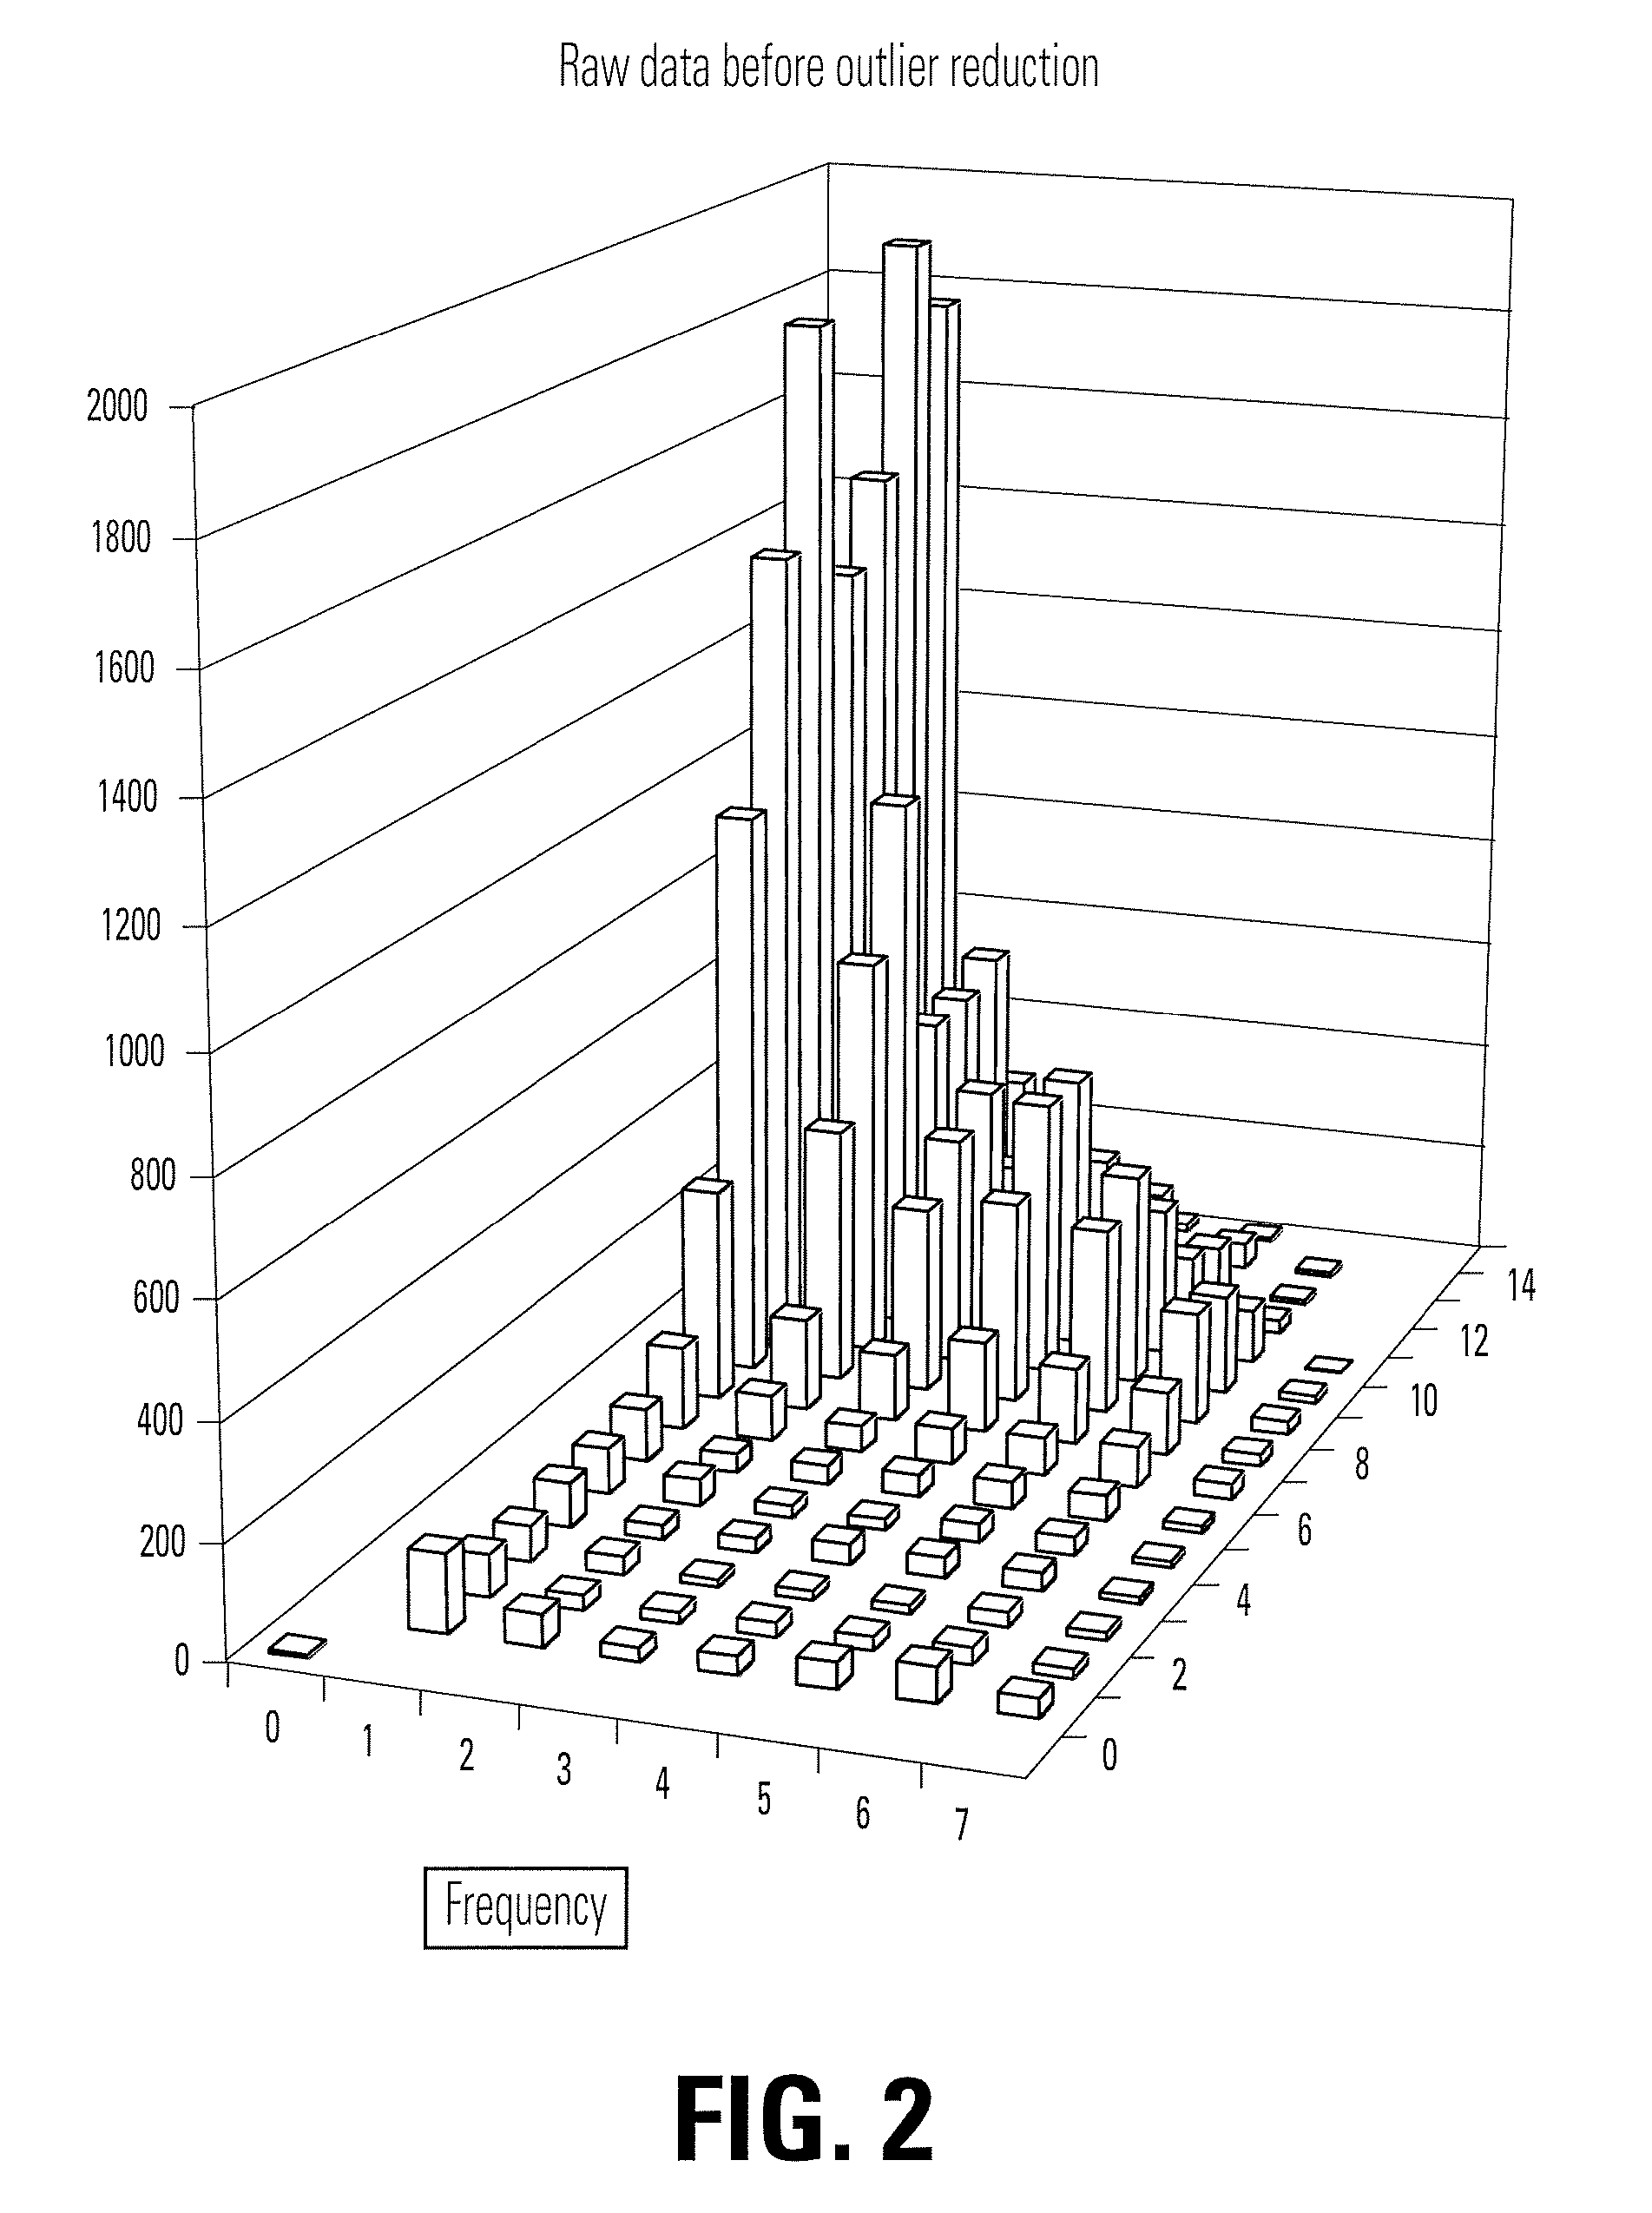 Method for quantifying the propensity to respond to an advertisement